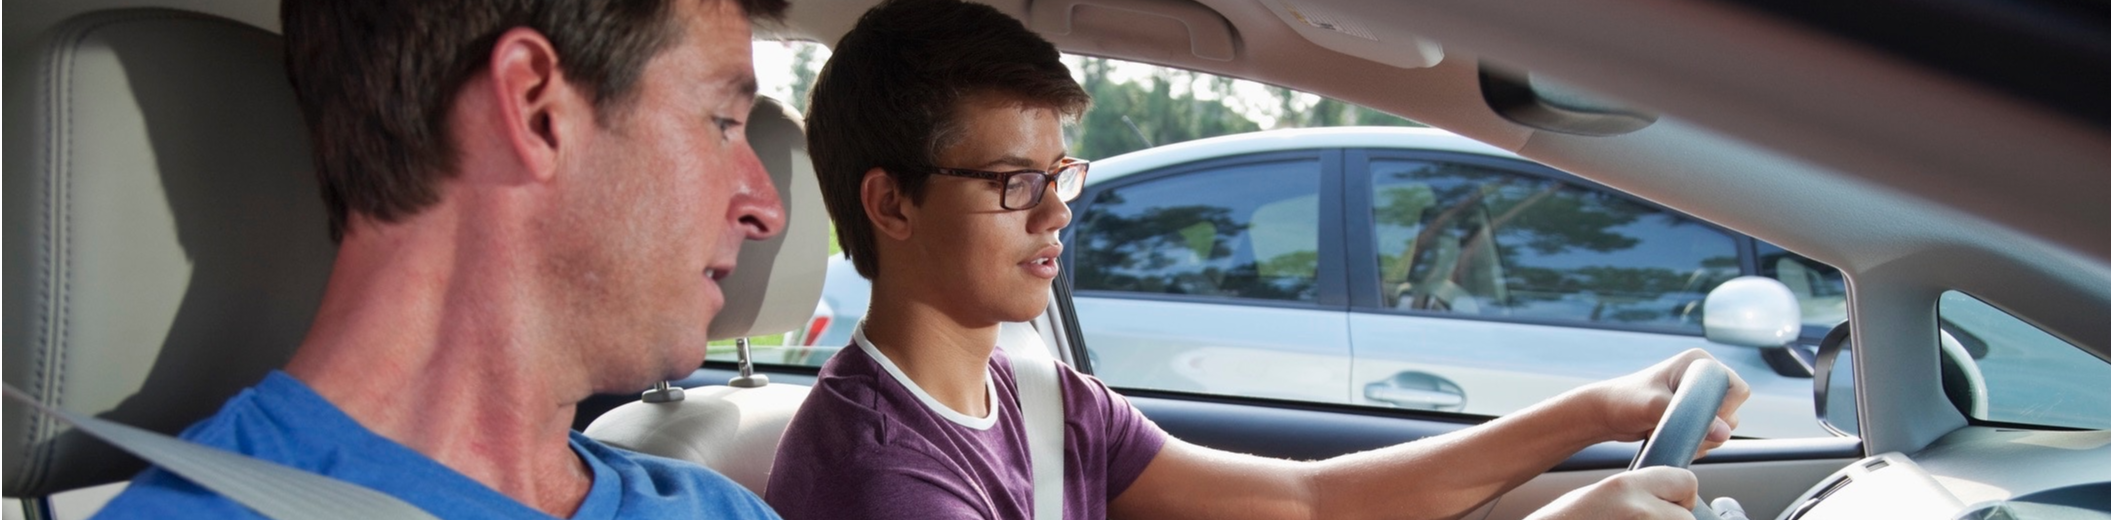 List of the Used Best Cars to Purchase for New Teen Drivers